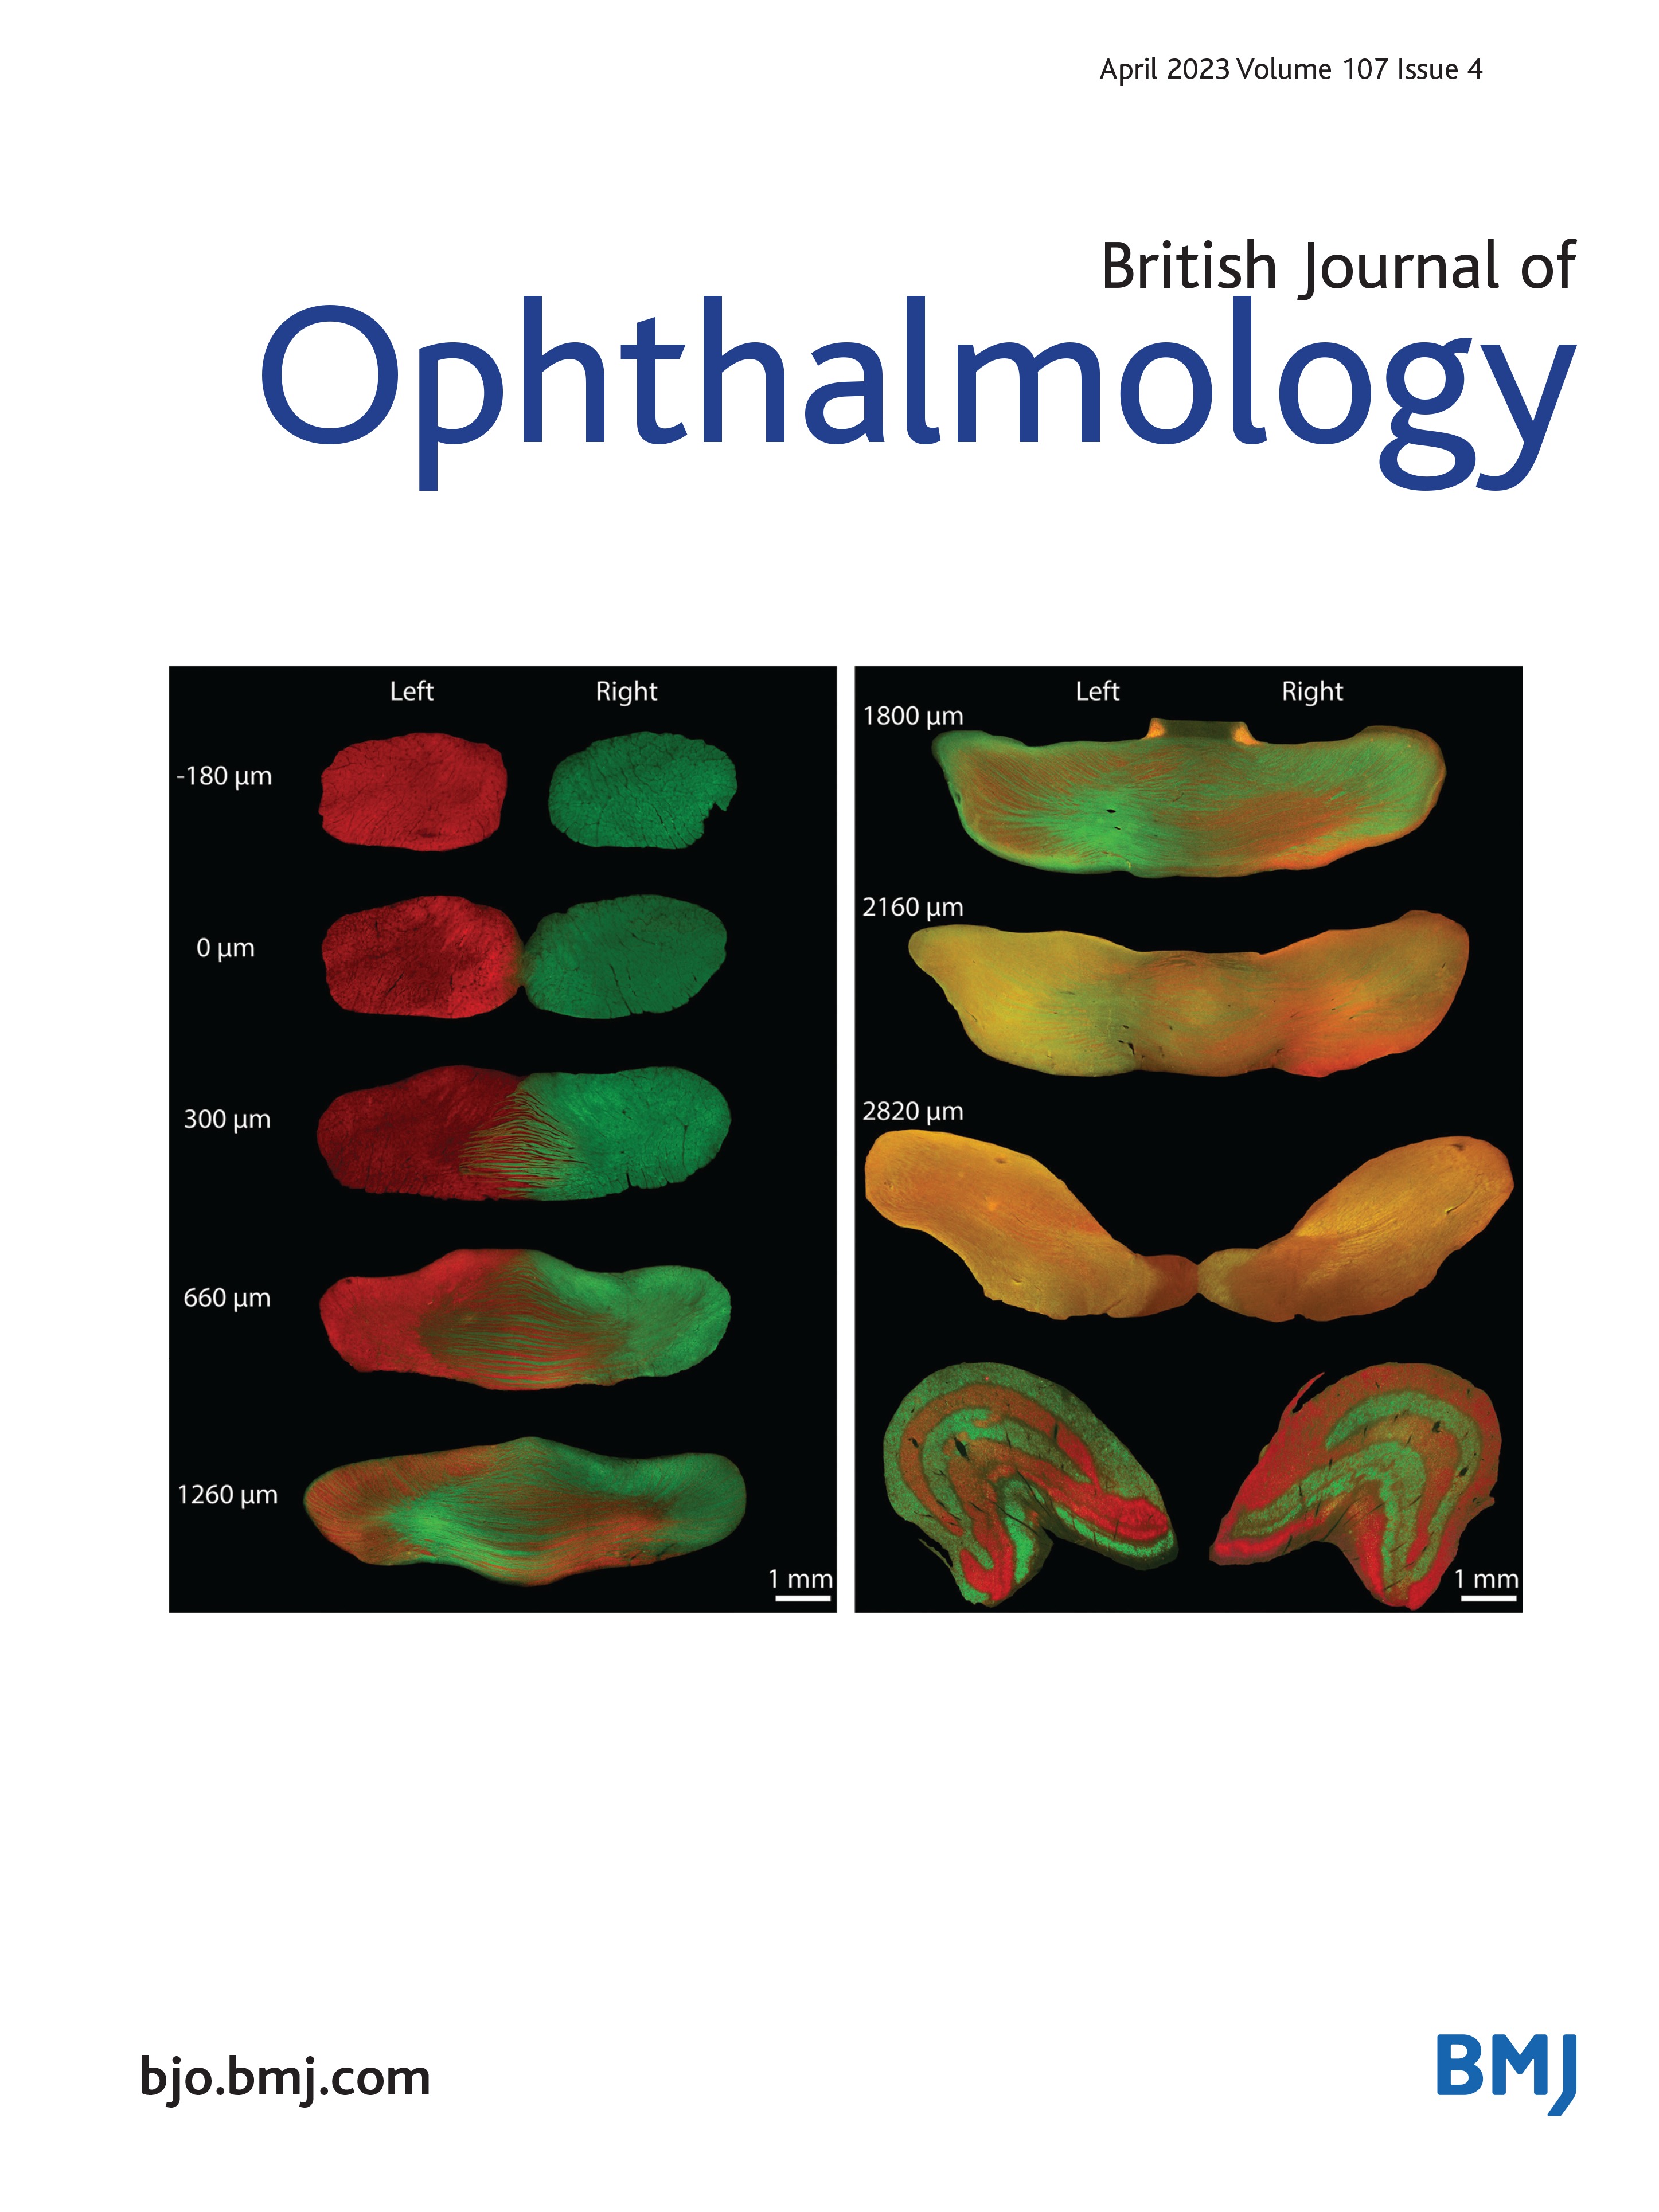 Ocular surface sphingolipids associate with the refractory nature of vernal keratoconjunctivitis: newer insights in VKC pathogenesis